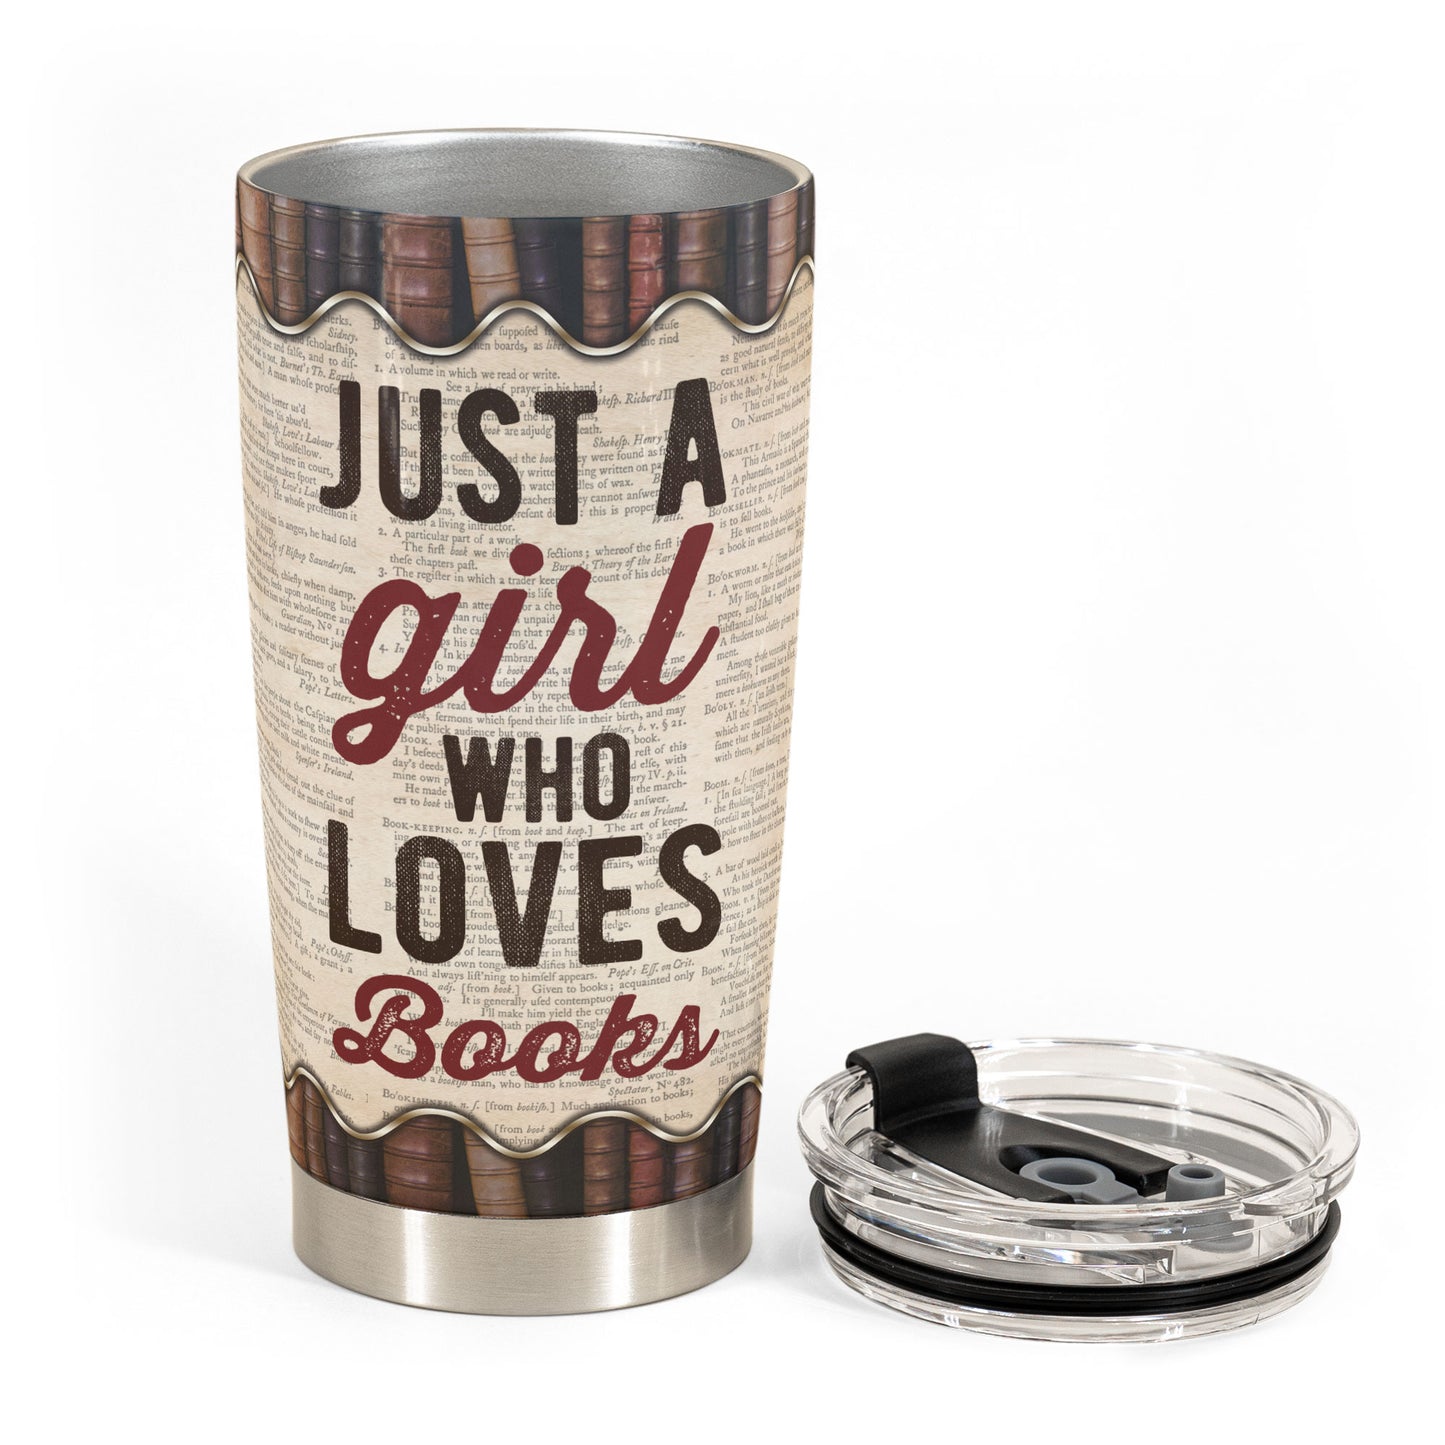 Just A Girl Who Loves Books - Girl Illustration - Personalized Tumbler  - Birthday Gift For Book Lover, Bookworms